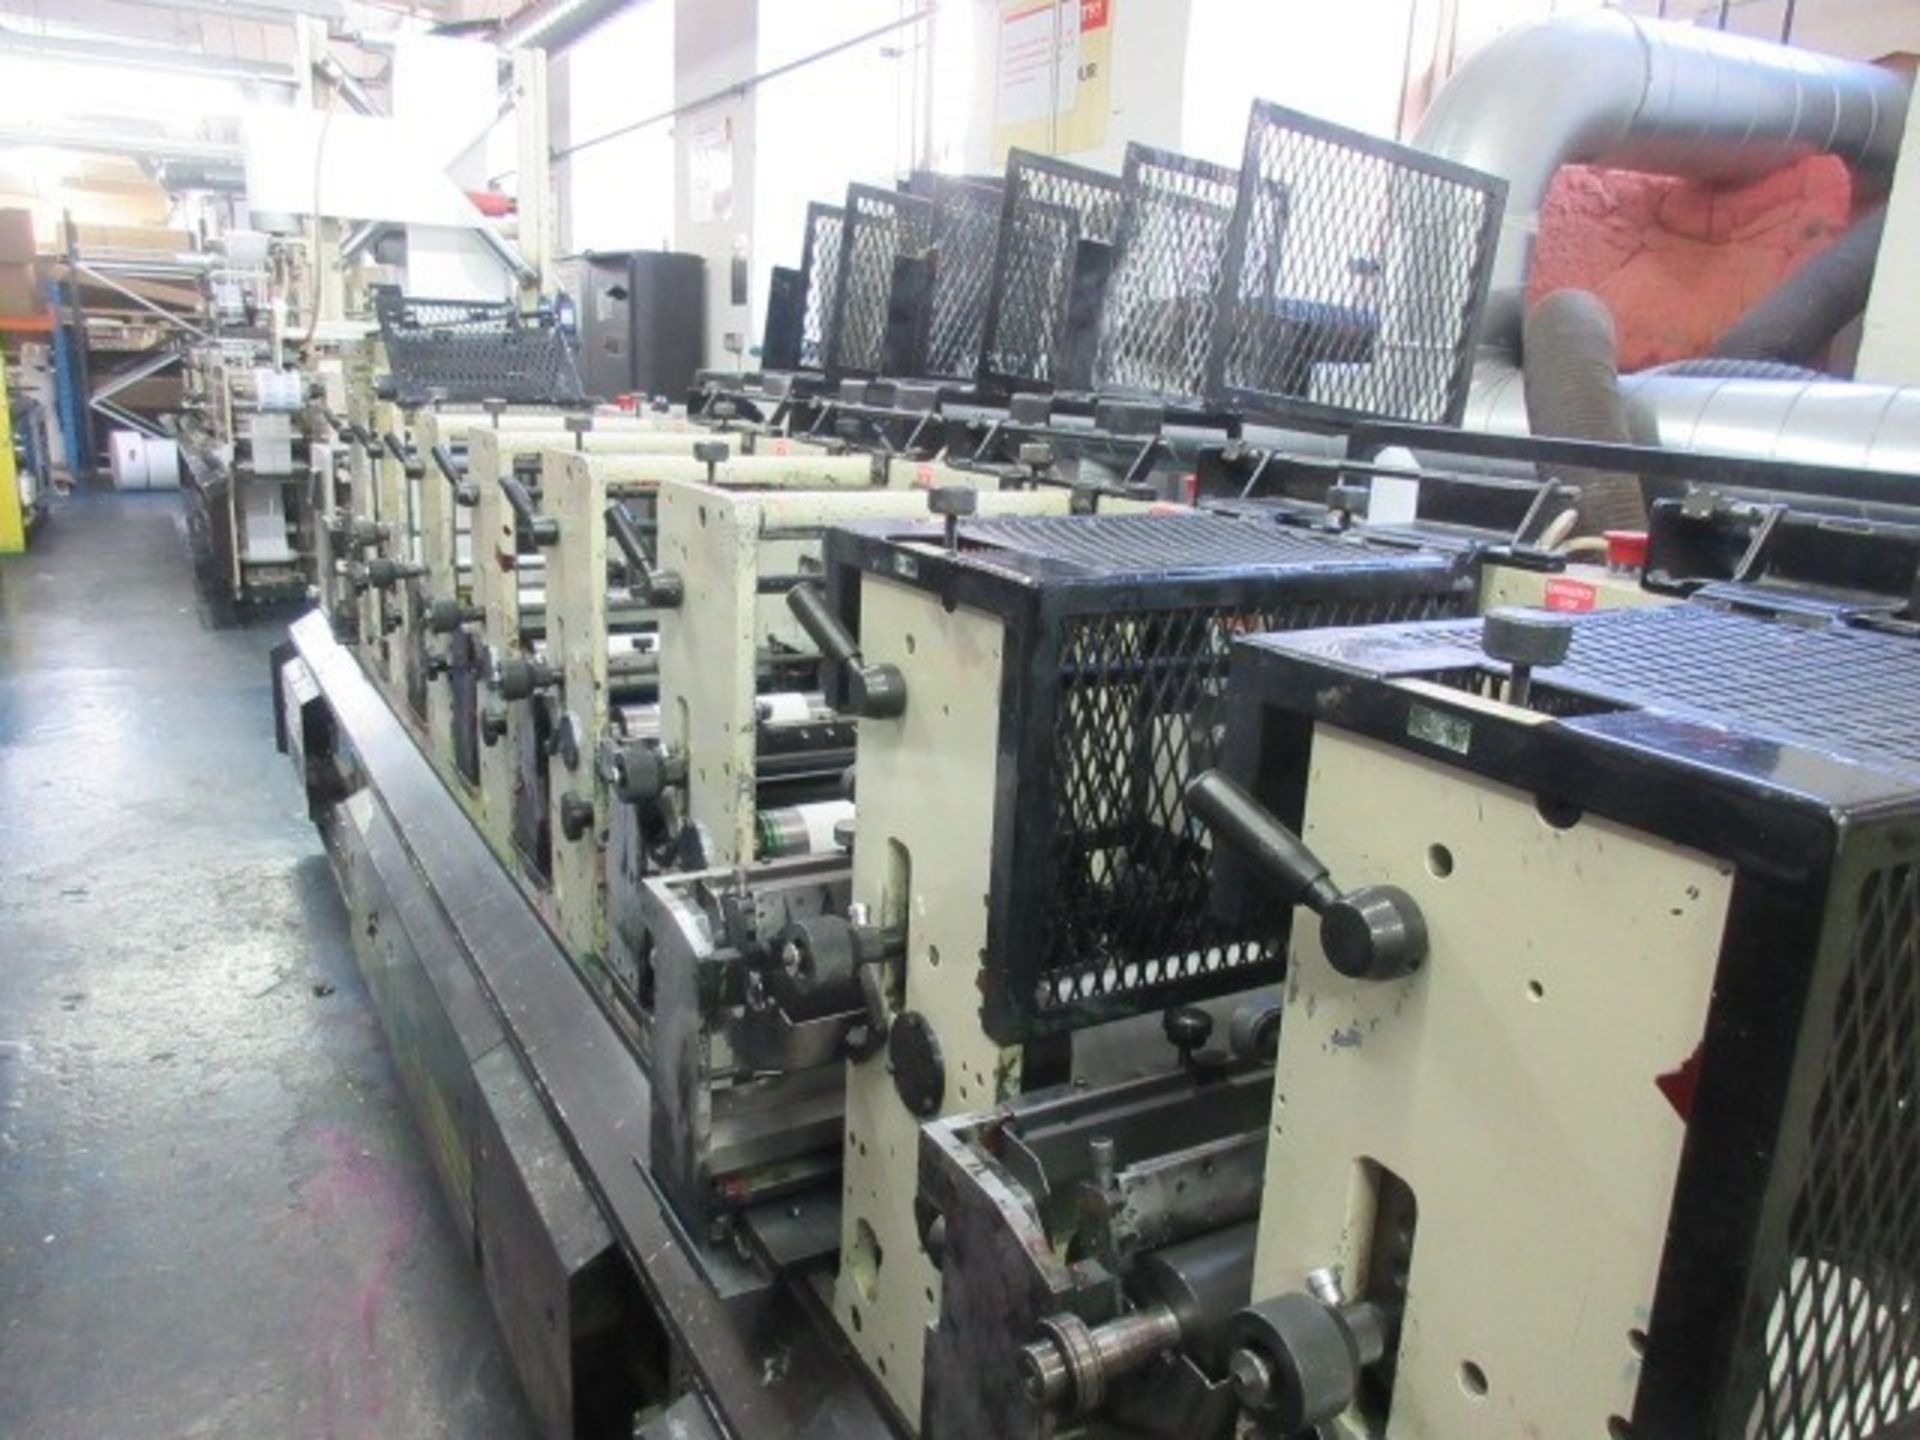 Mark Andy 2200-10F 10” 8 colour flexographic label printing press. Serial no: 1260086 (2002) - Image 249 of 383